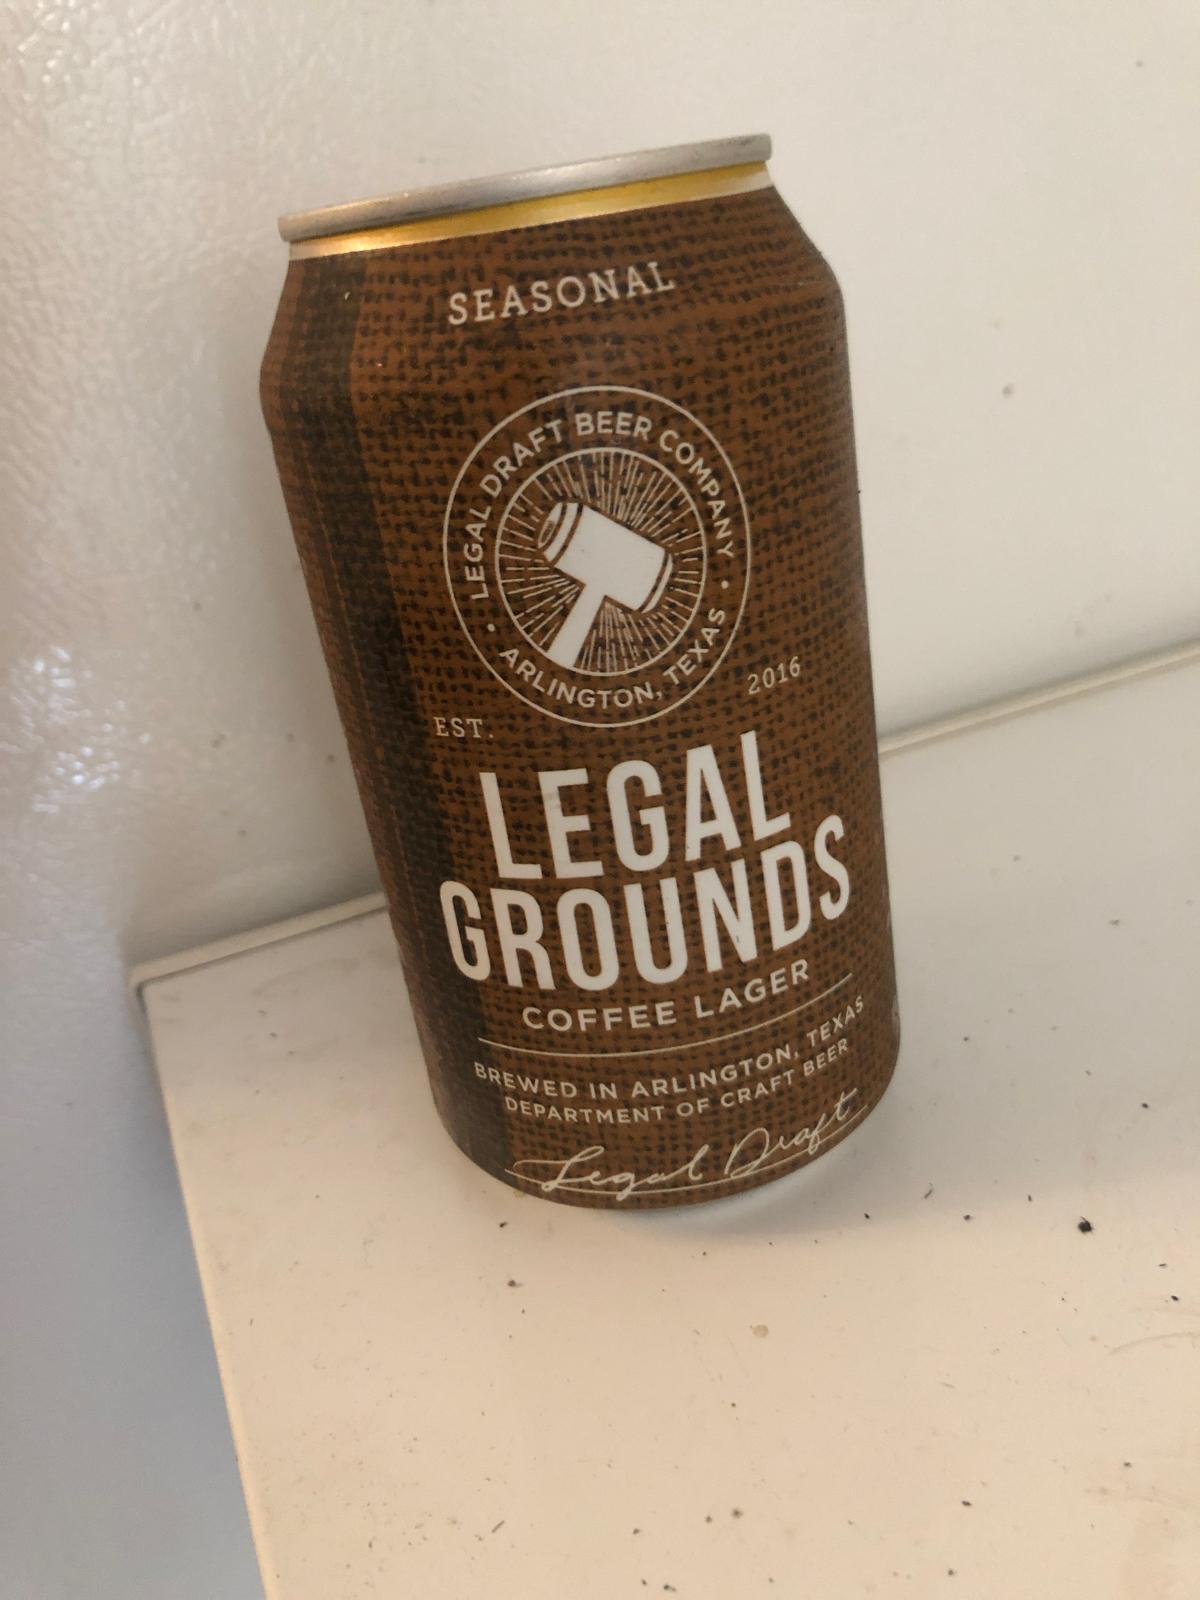 Legal Grounds